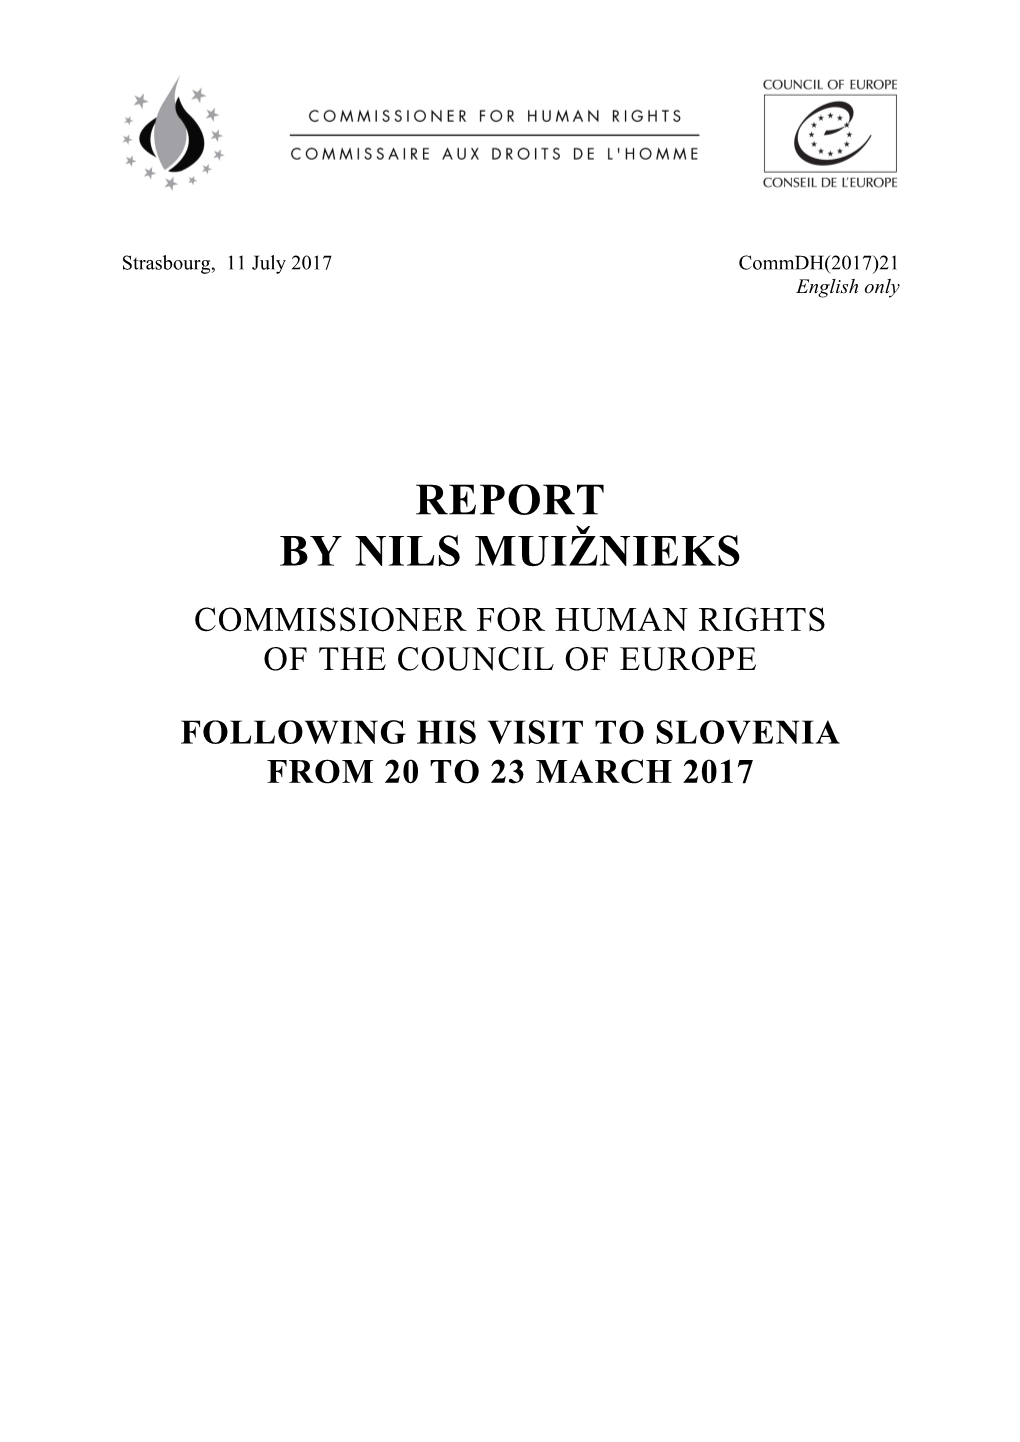 Report by Nils MUIŽNIEKS, Commissioner for Human